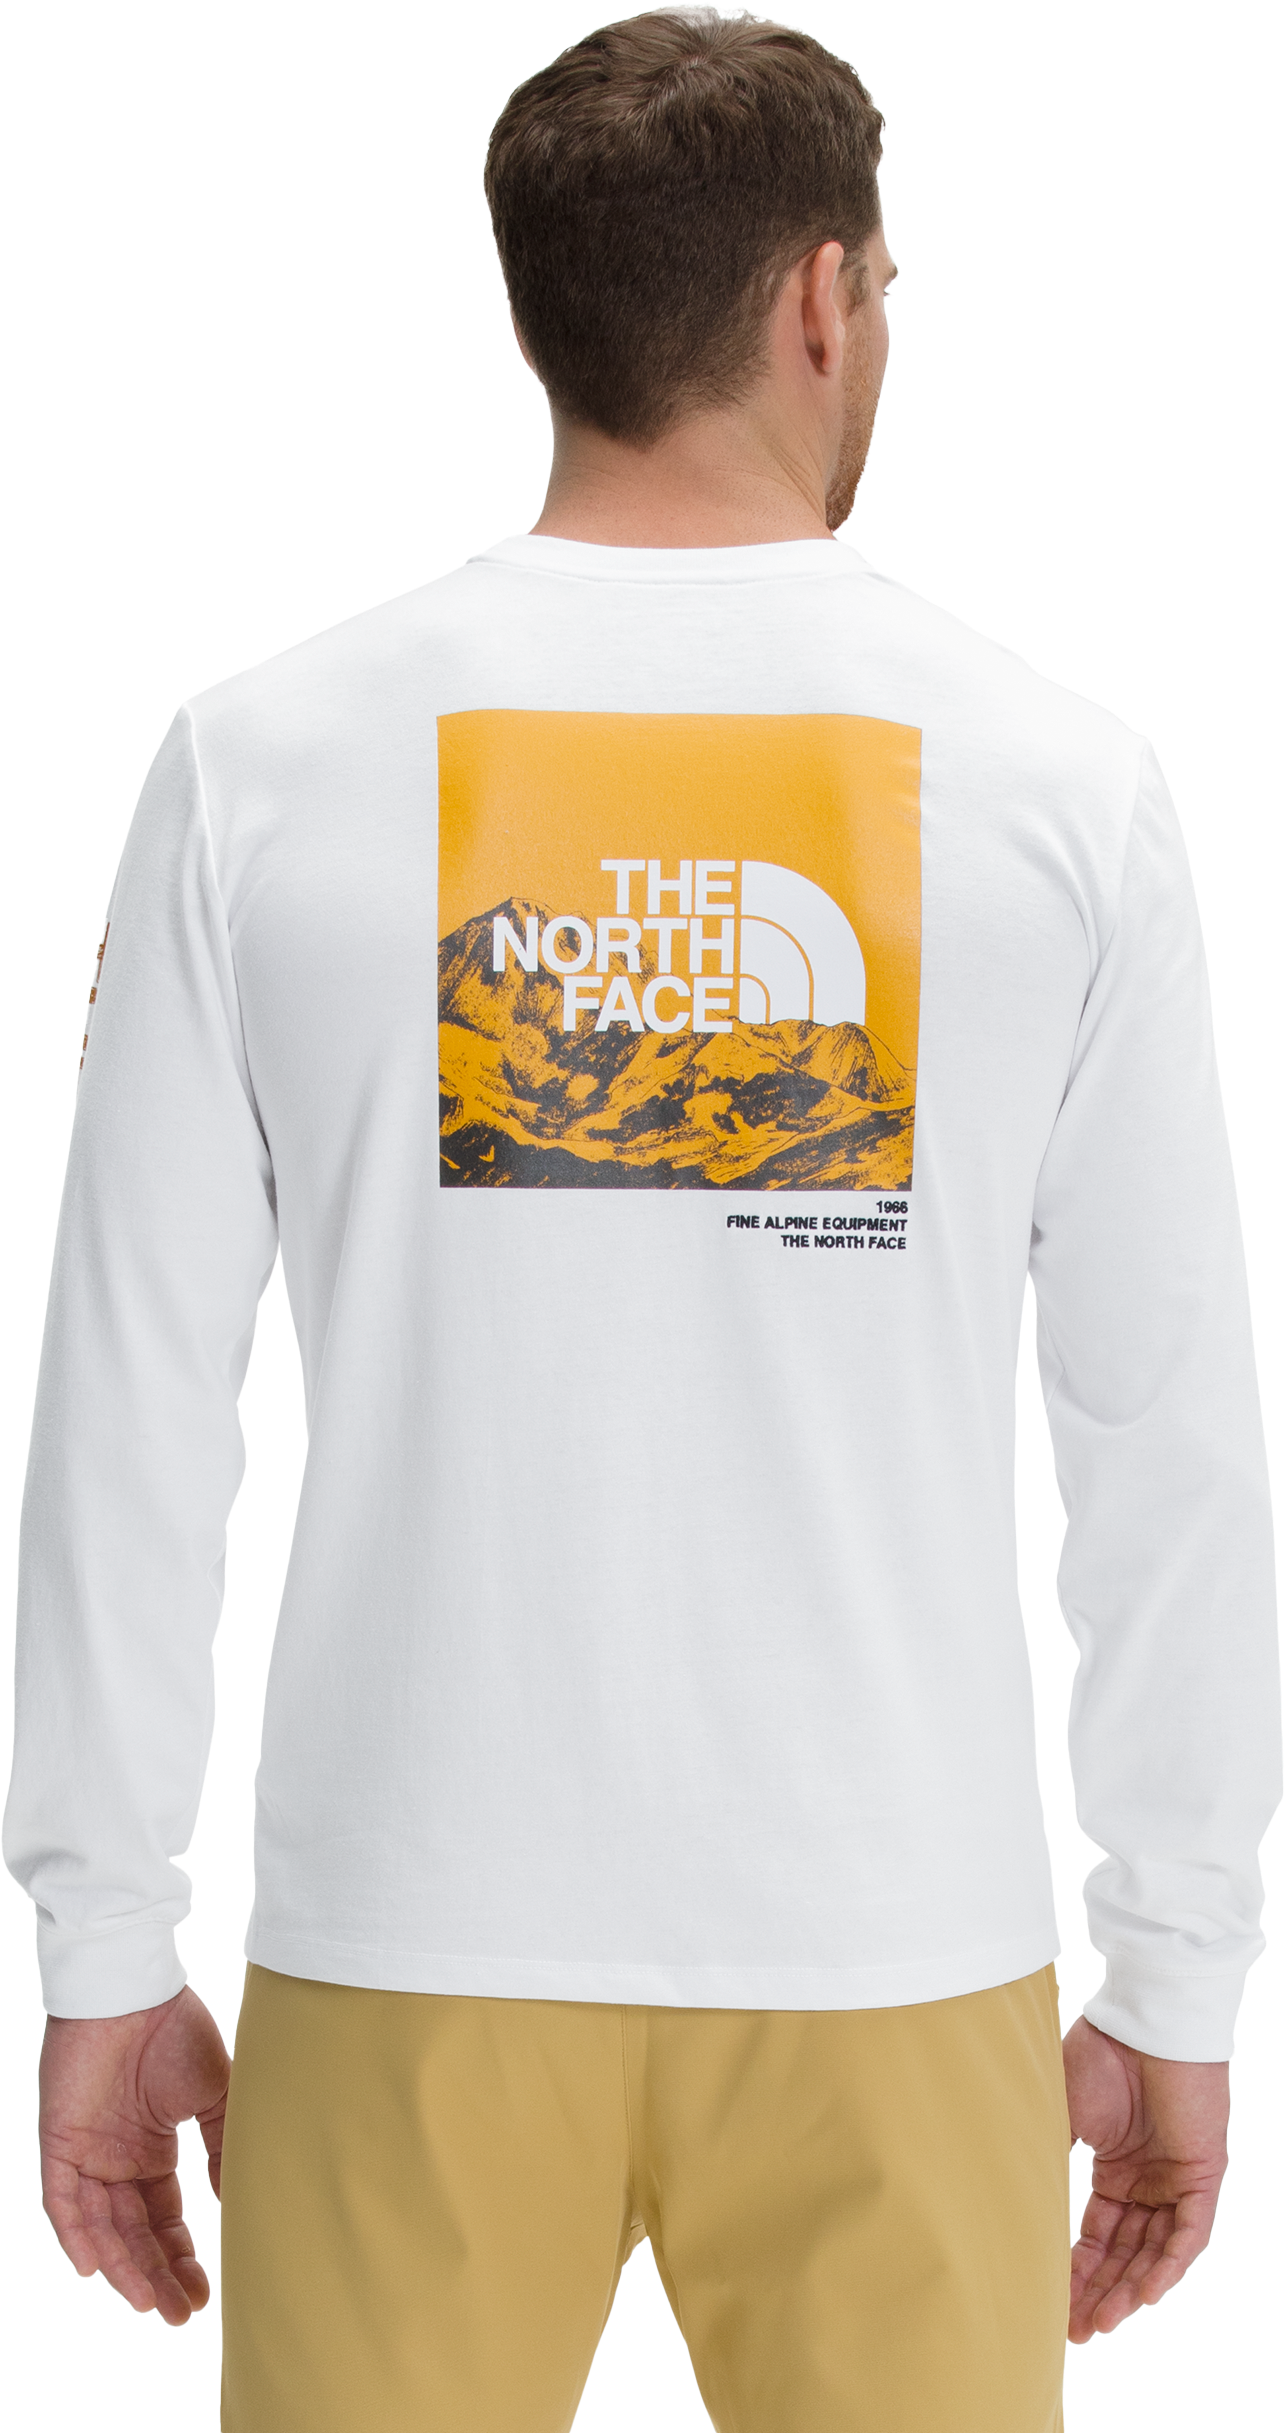 The North Face Logo Play Long-Sleeve T-Shirt for Men - TNF White - L